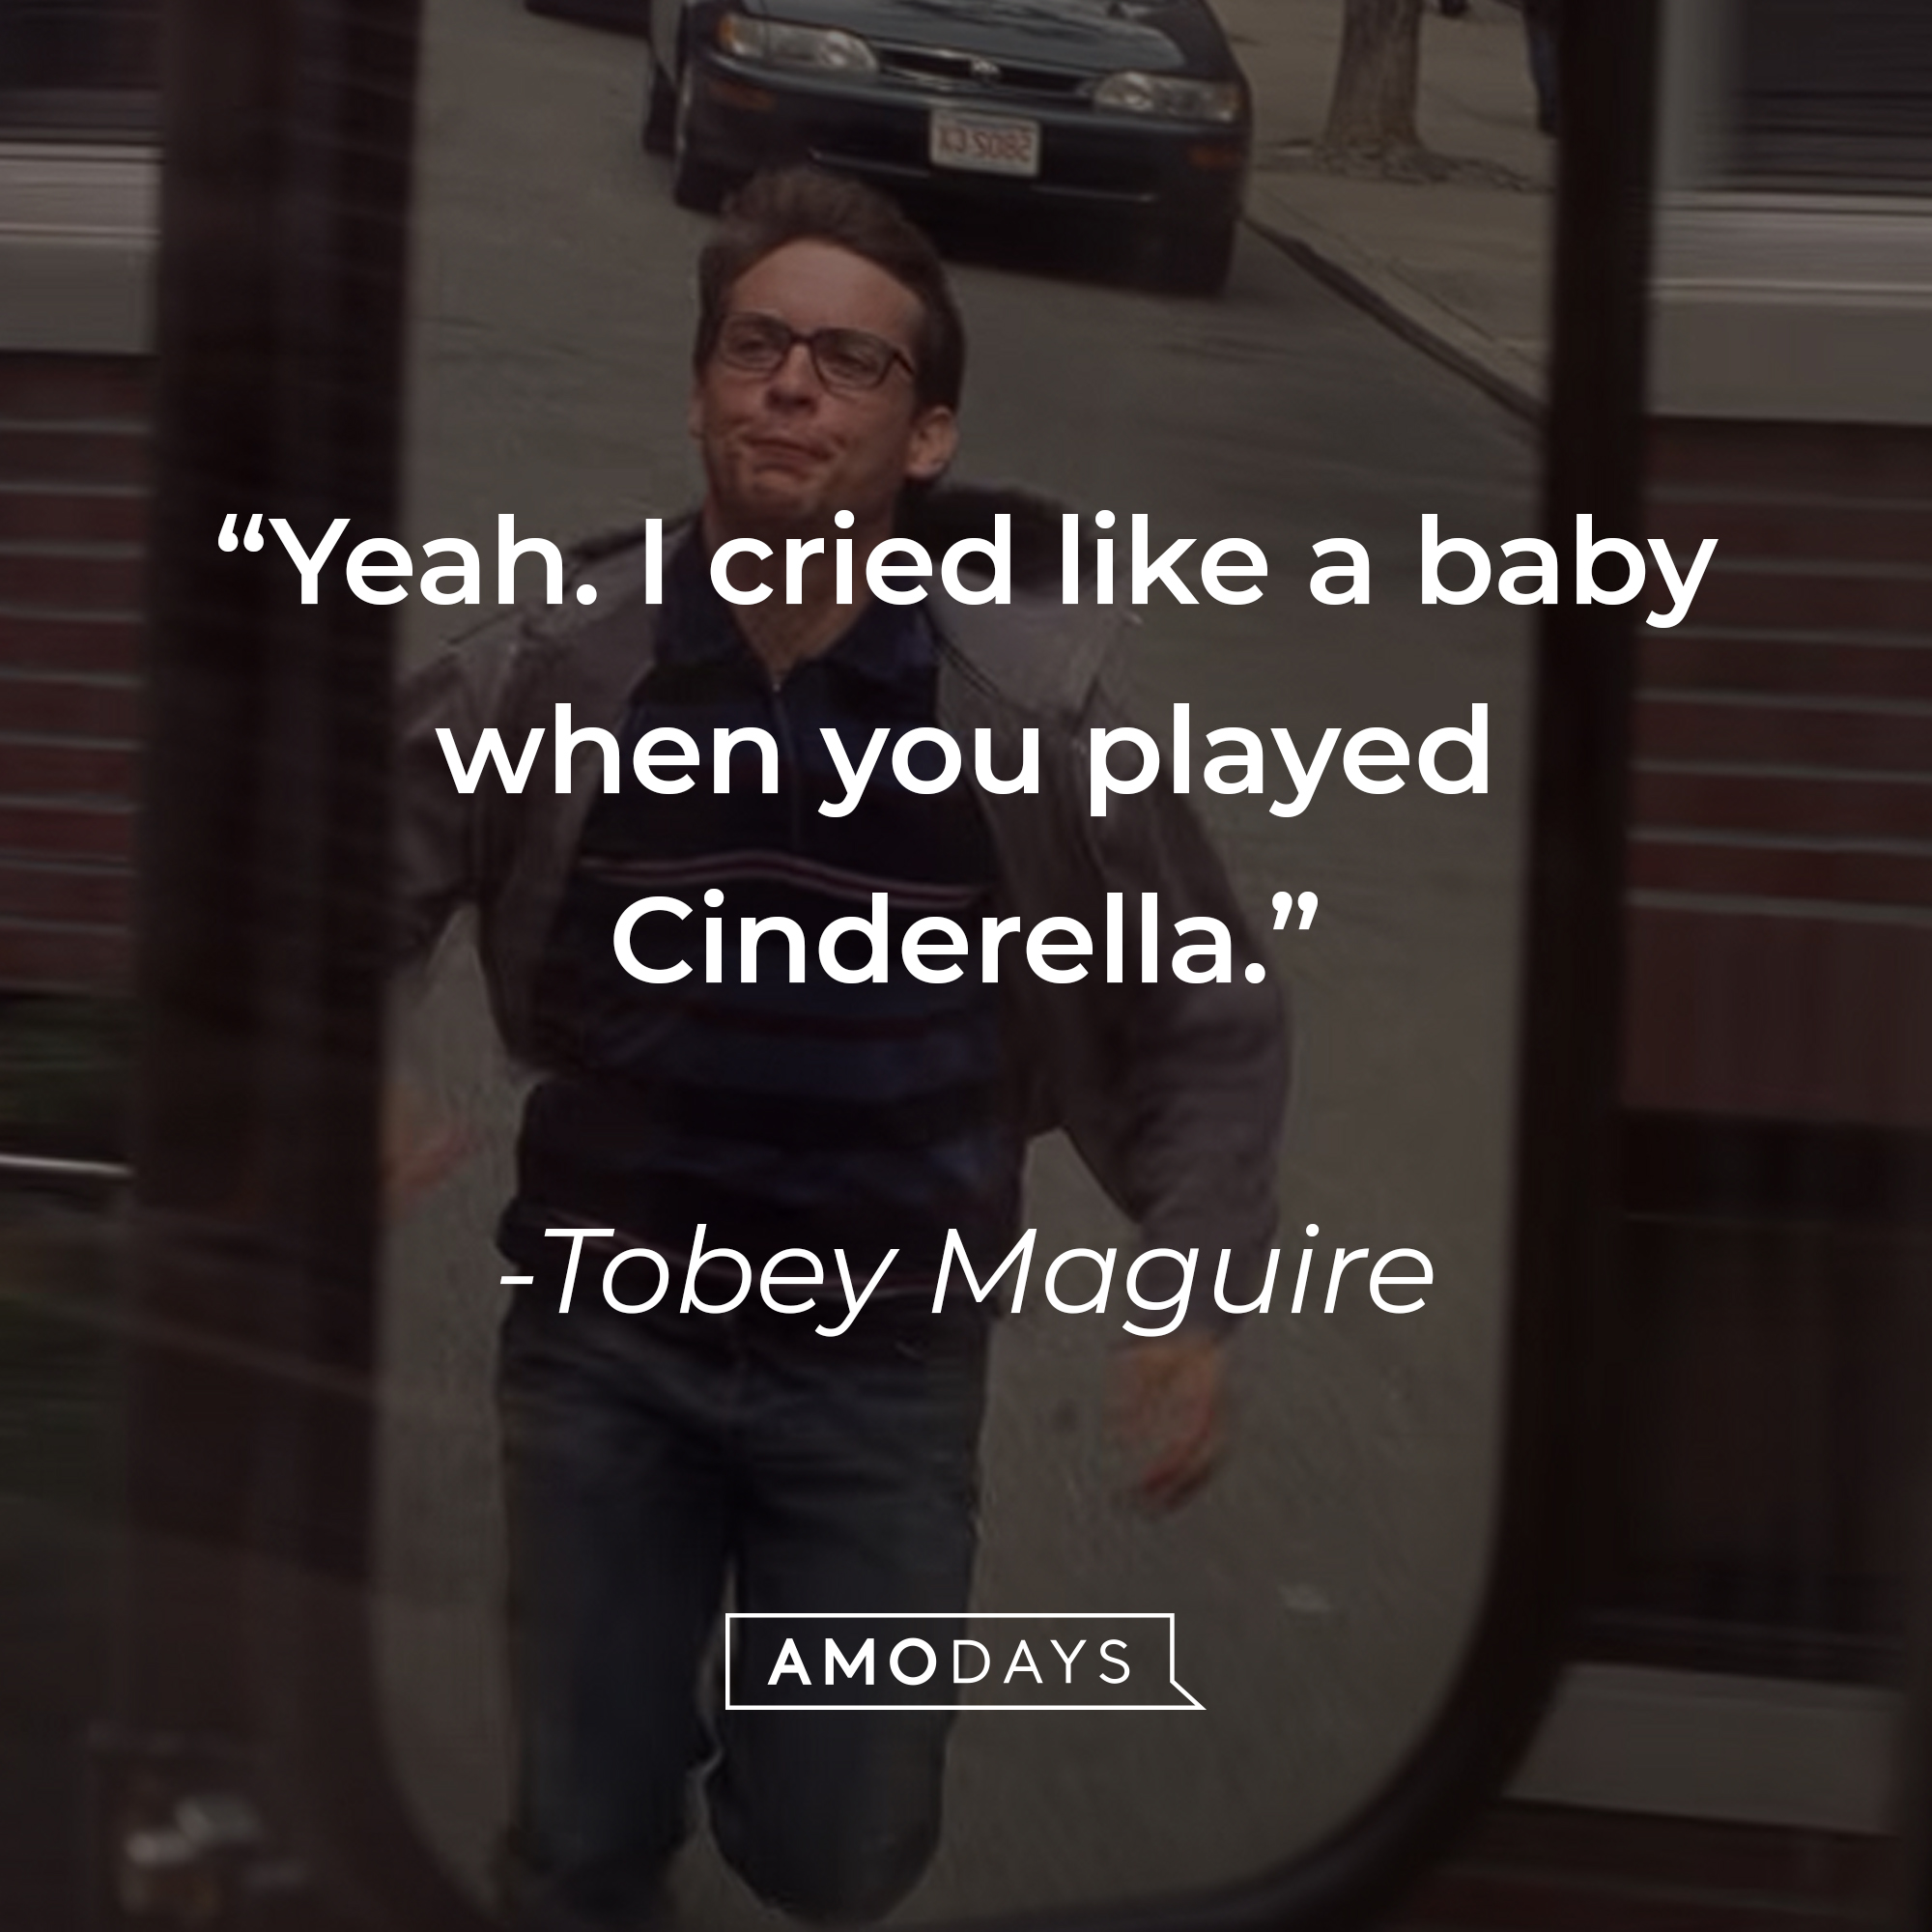 Tobey Maguire's quote: “Yeah. I cried like a baby when you played Cinderella.” | Source: youtube.com/sonypictures